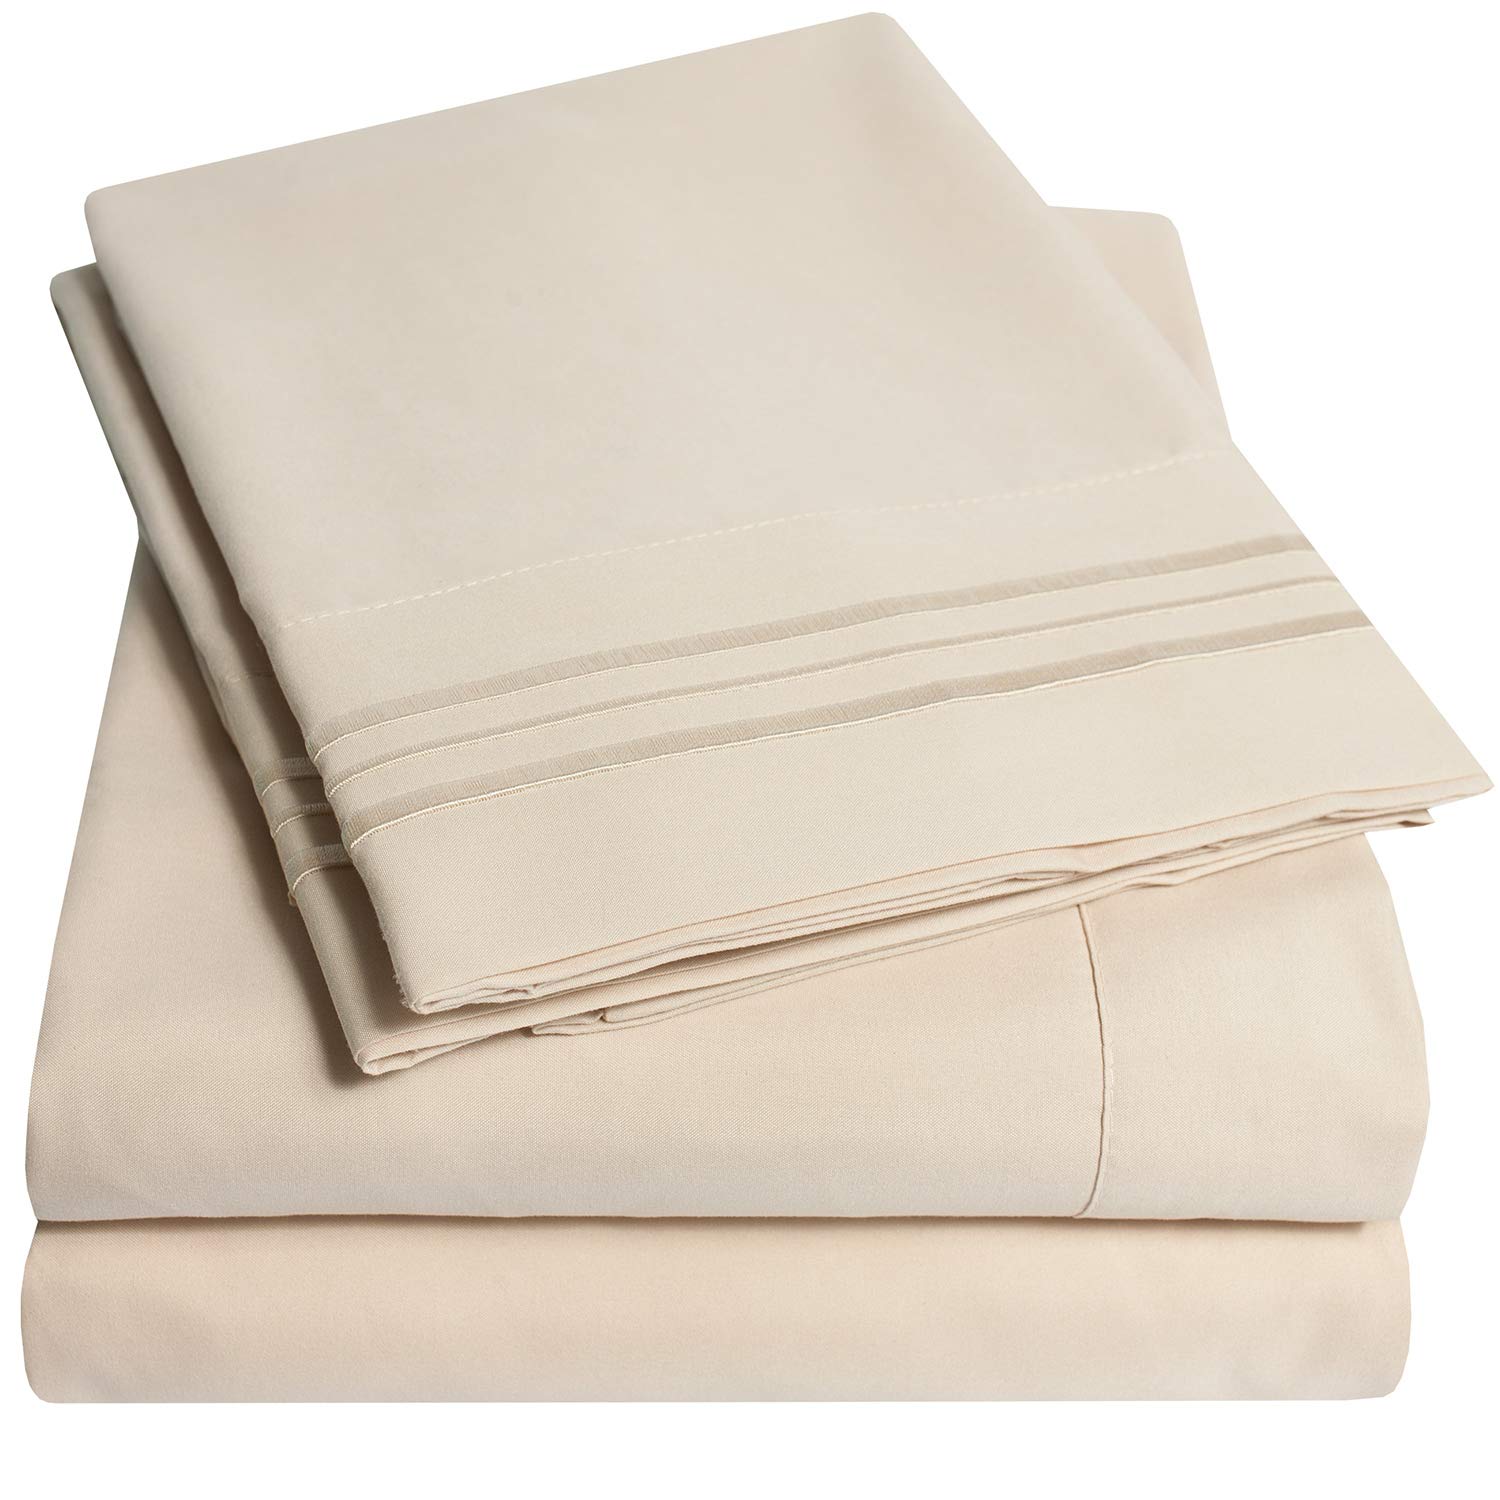 Book Cover 1500 Supreme Collection Full Sheet Sets Beige Cream - Luxury Hotel Bed Sheets and Pillowcase Set for Full Mattress - Extra Soft, Elastic Corner Straps, Deep Pocket Sheets, Full Beige Cream